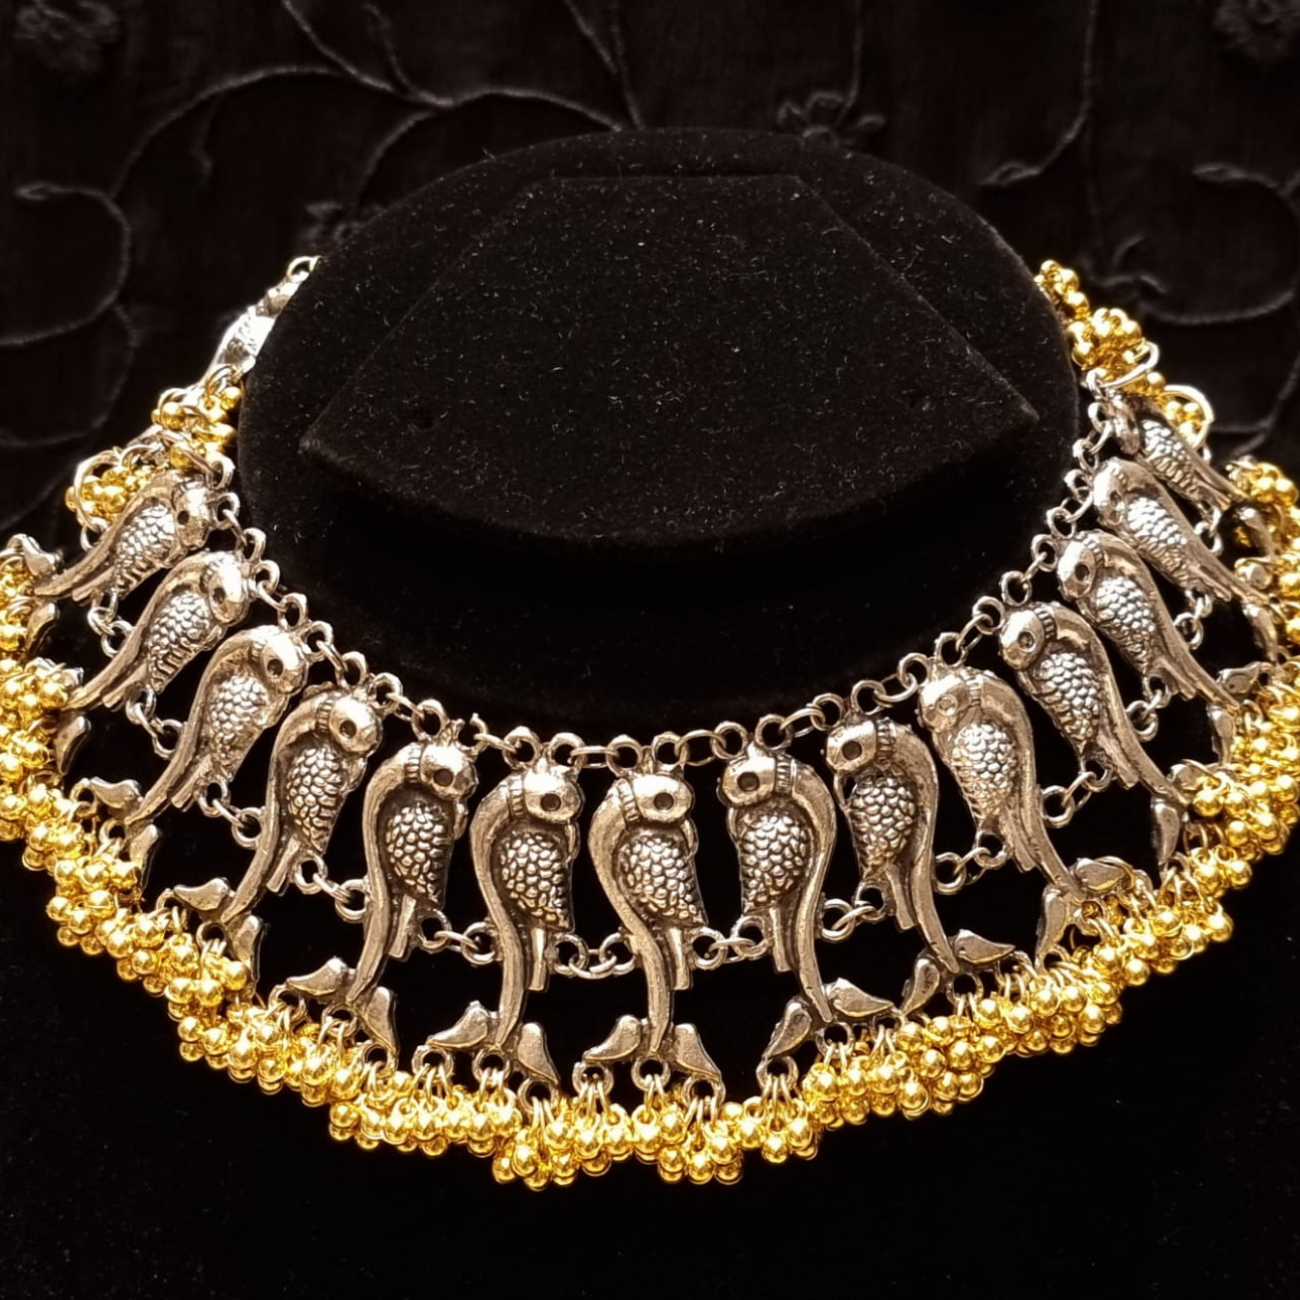 Trendia Peacock Design Choker Necklace with Golden Ghungroo Jhumkas